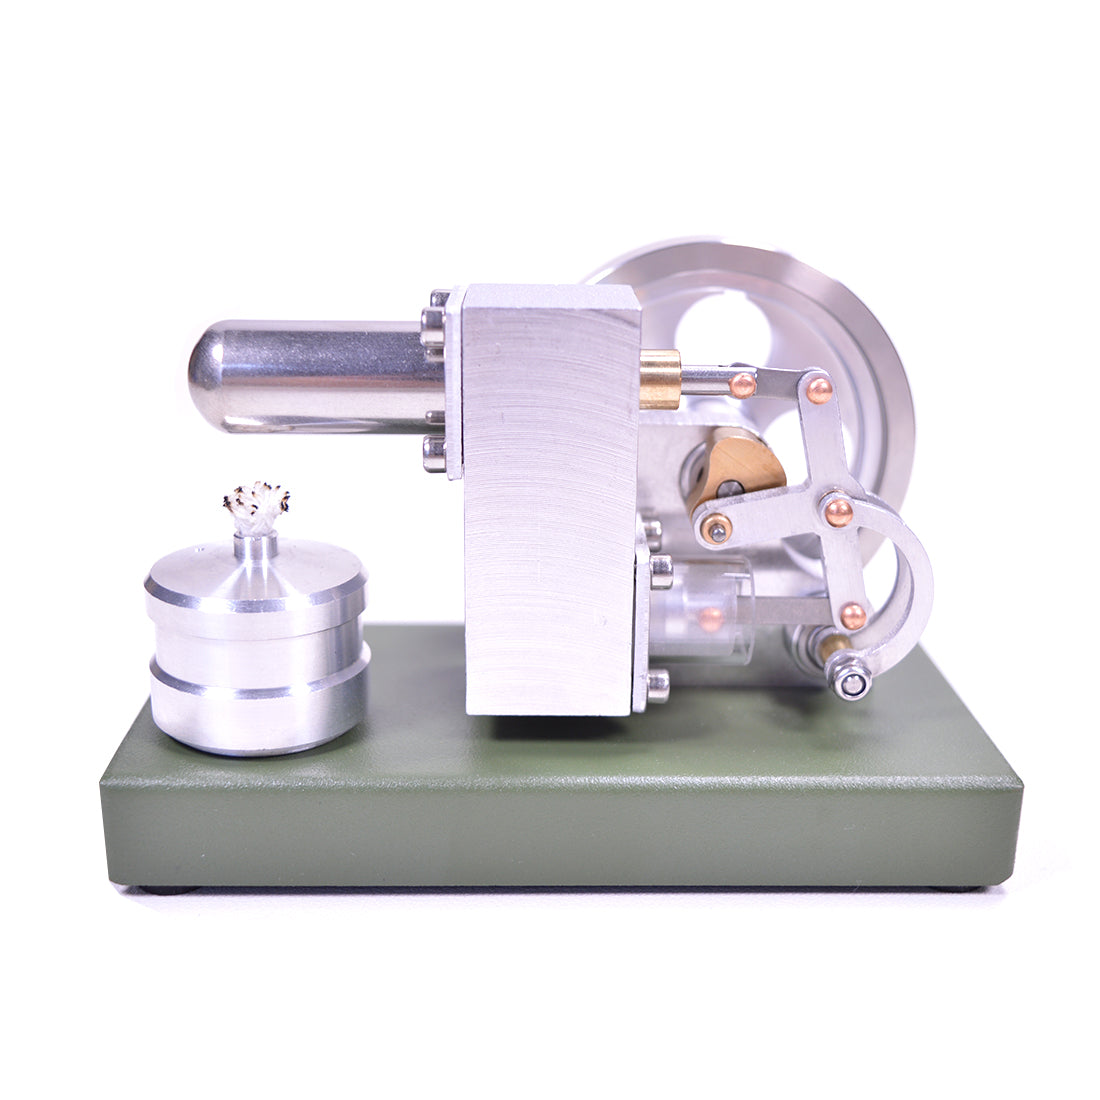 ENJOMOR Minitype α-type Hot-air Stirling External Combustion Engine Model DIY Physics Science Experiment Toy